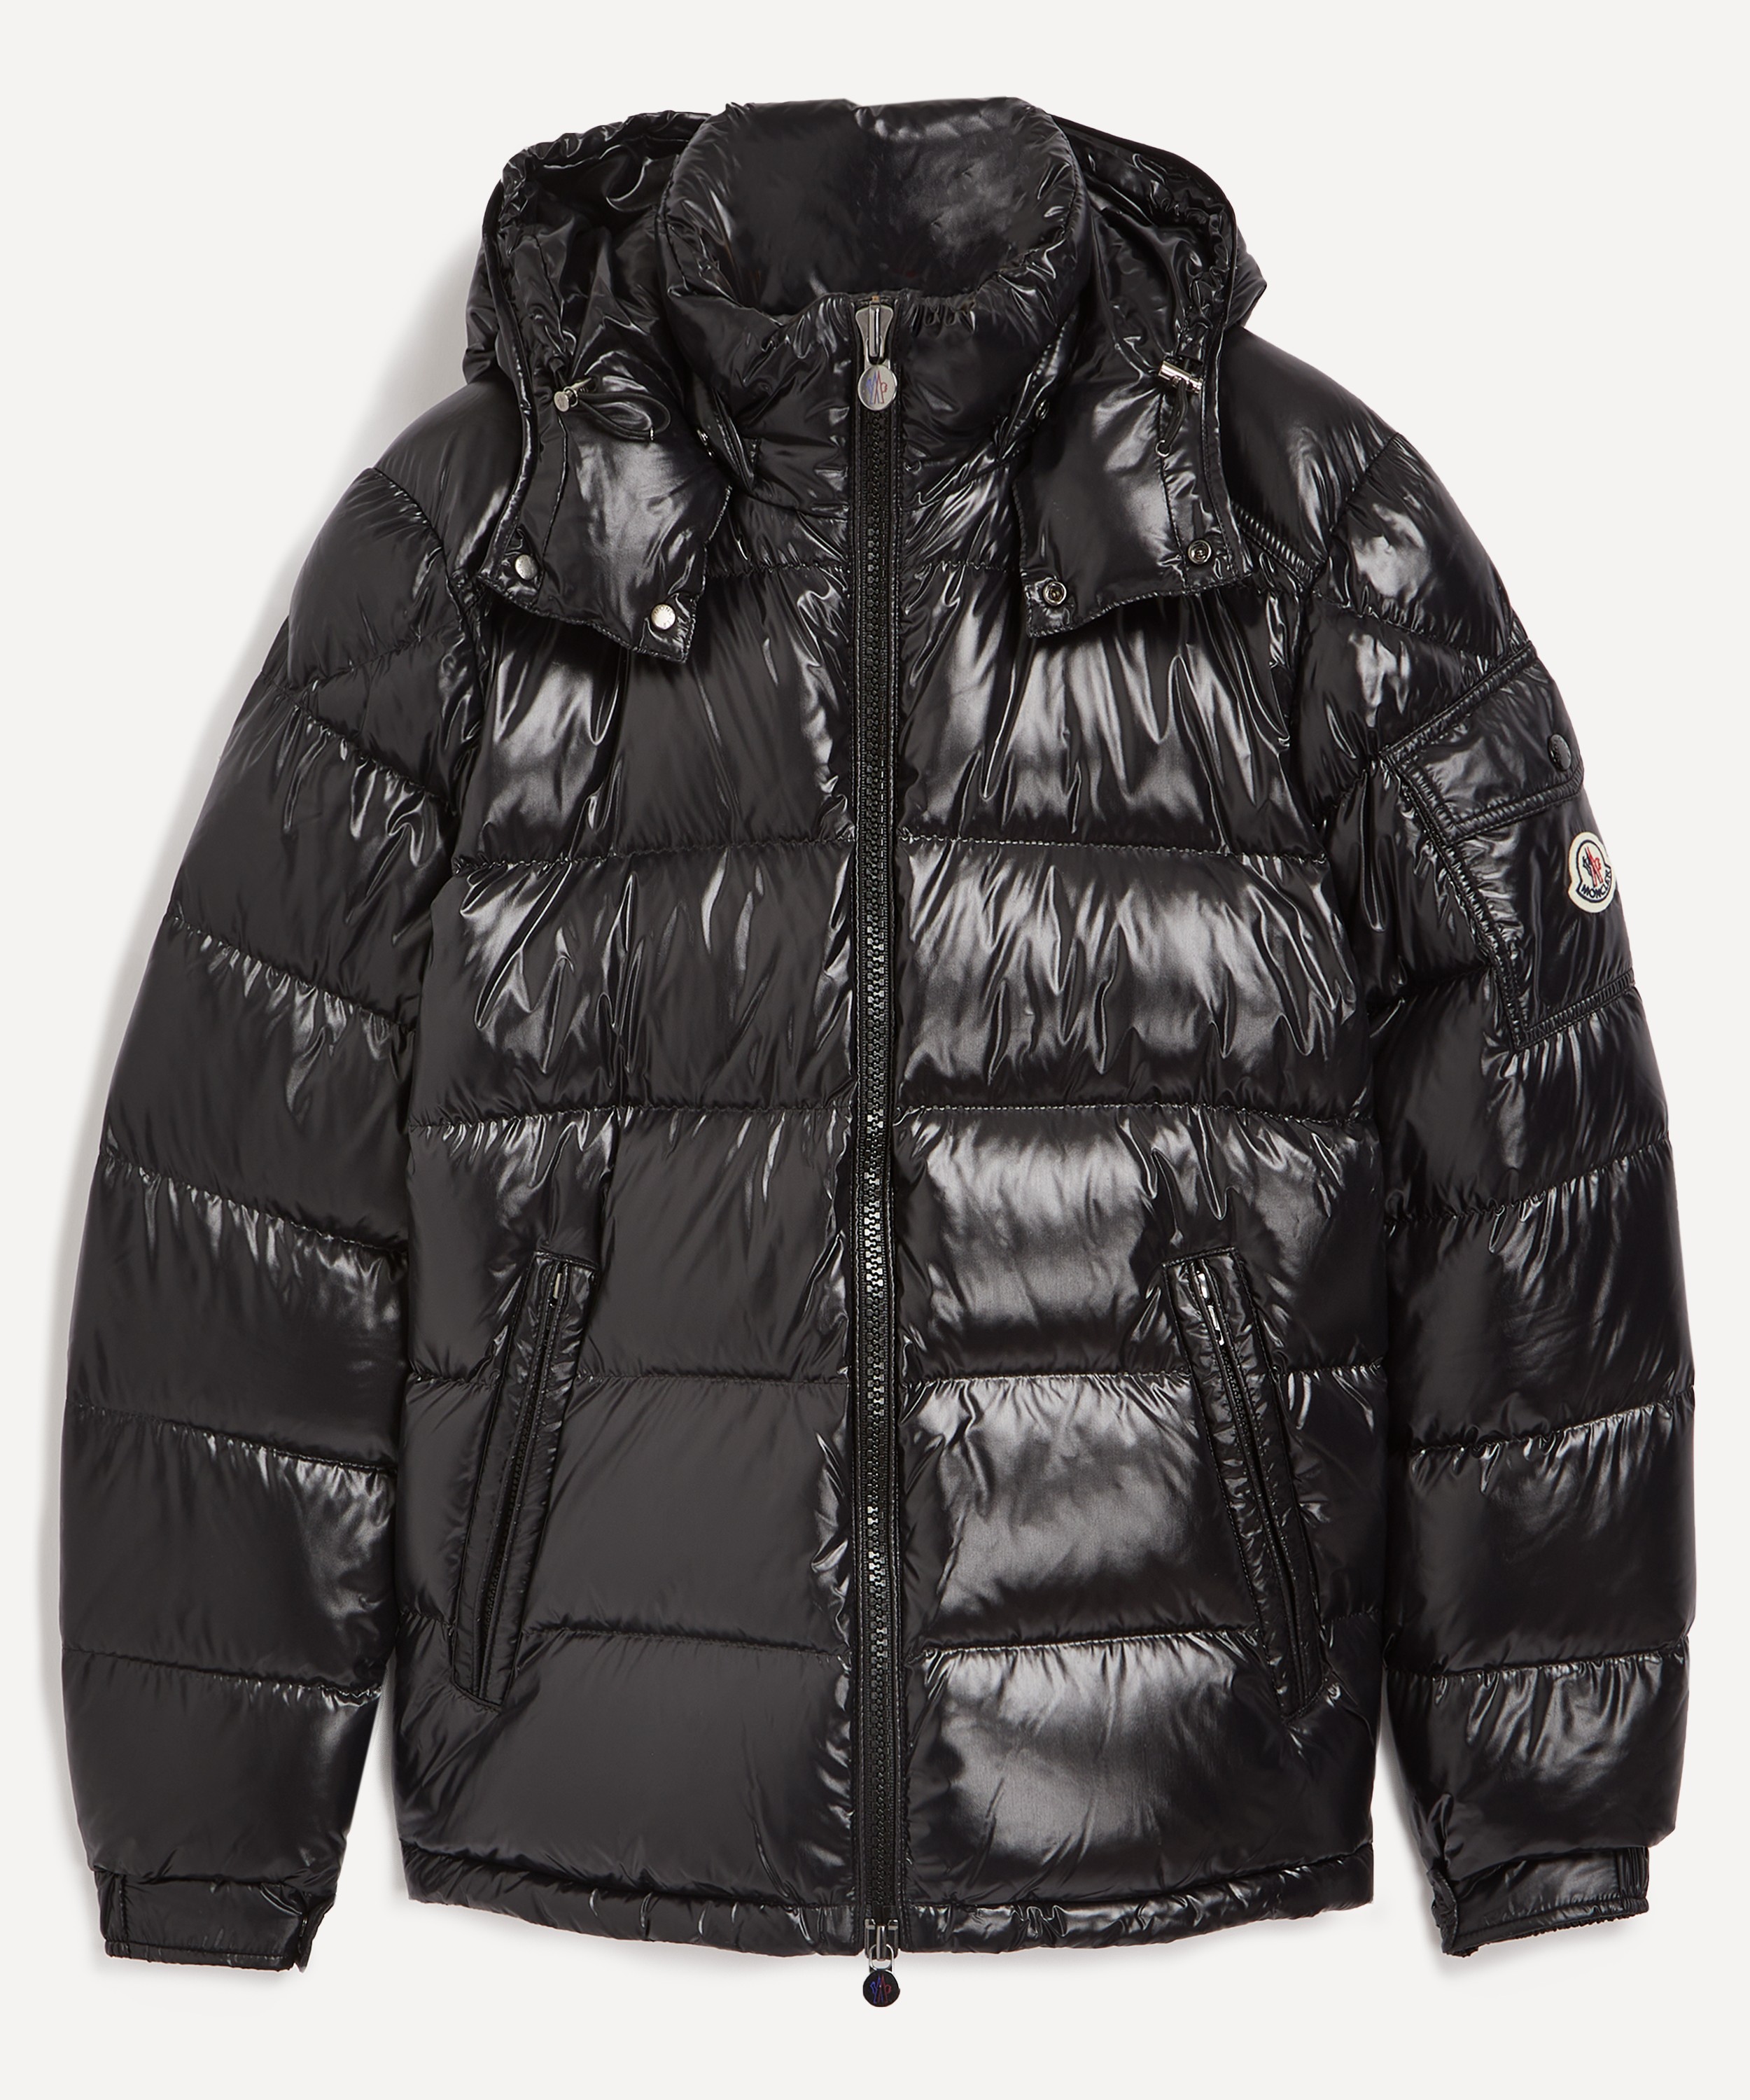 The Complete Guide to Moncler Jackets: History, Sizing & Care